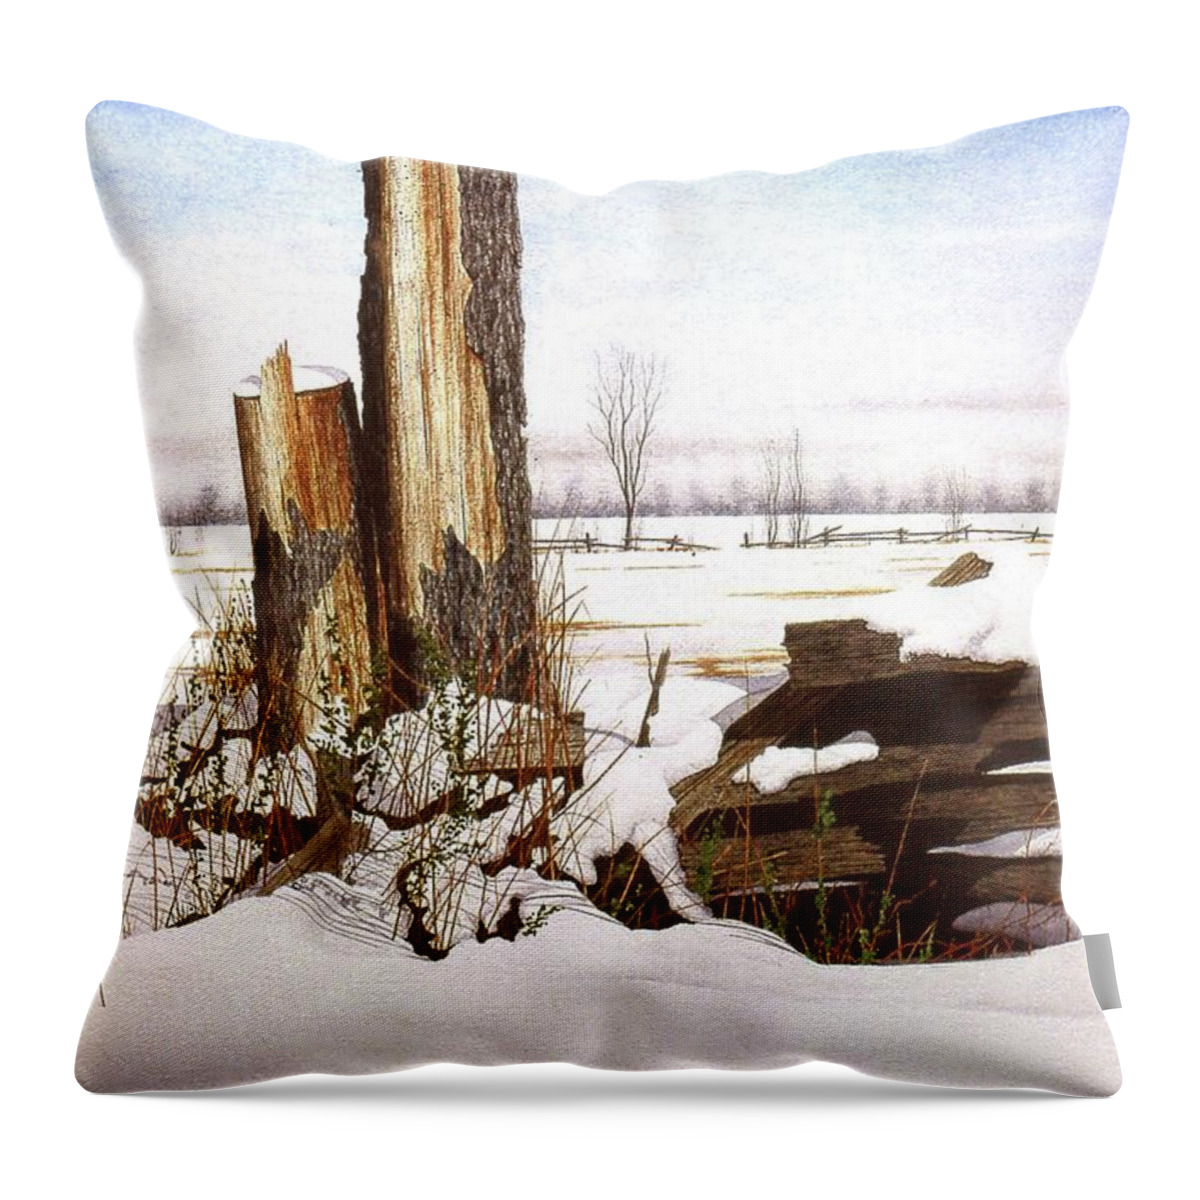 Snow Throw Pillow featuring the painting Wet Snow by Conrad Mieschke